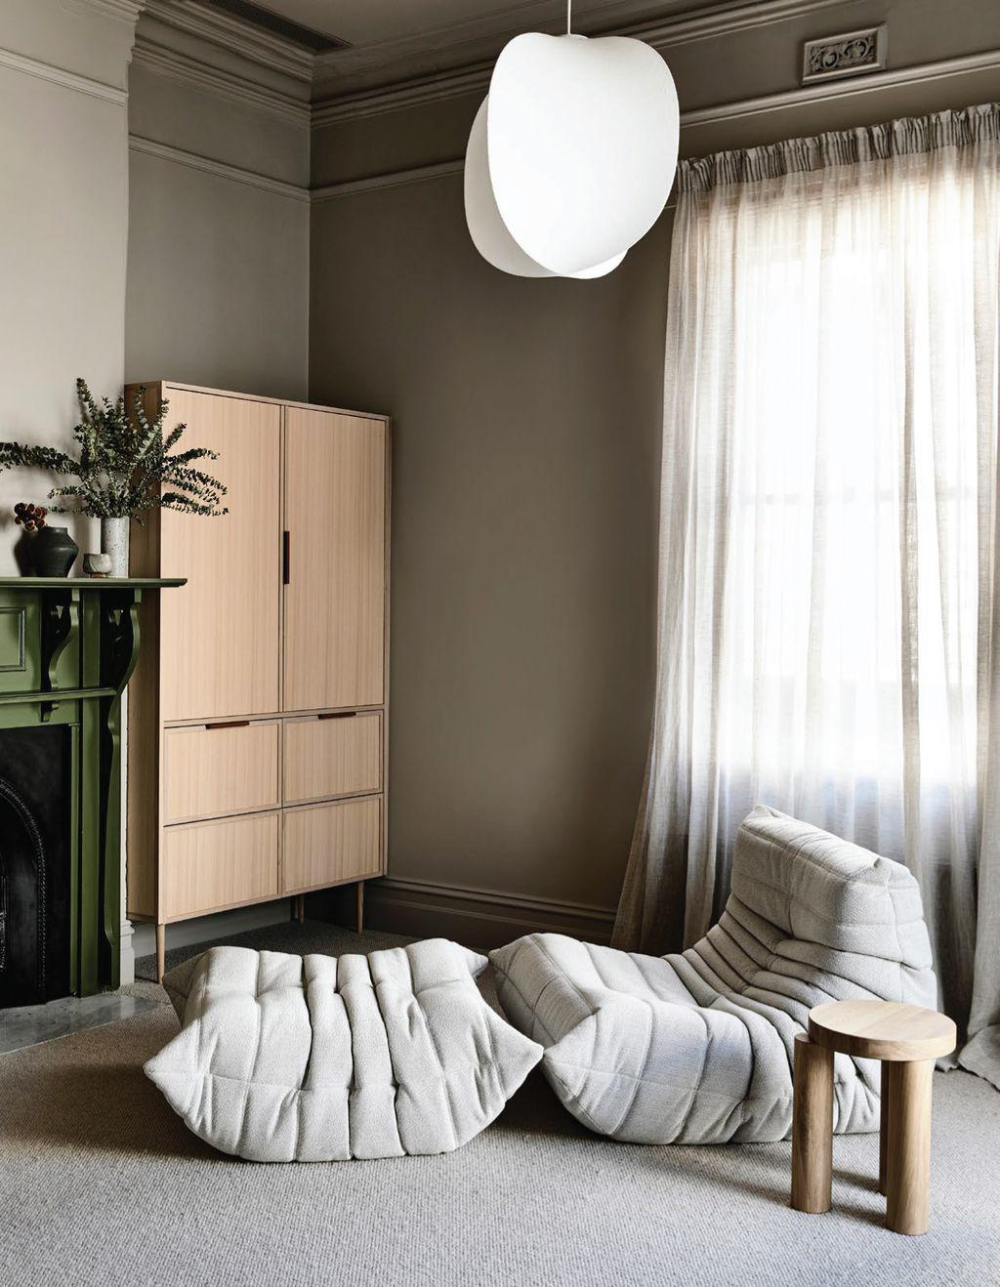 Transforming Tiny Rooms: Mastering the Art of Decorating Small Spaces